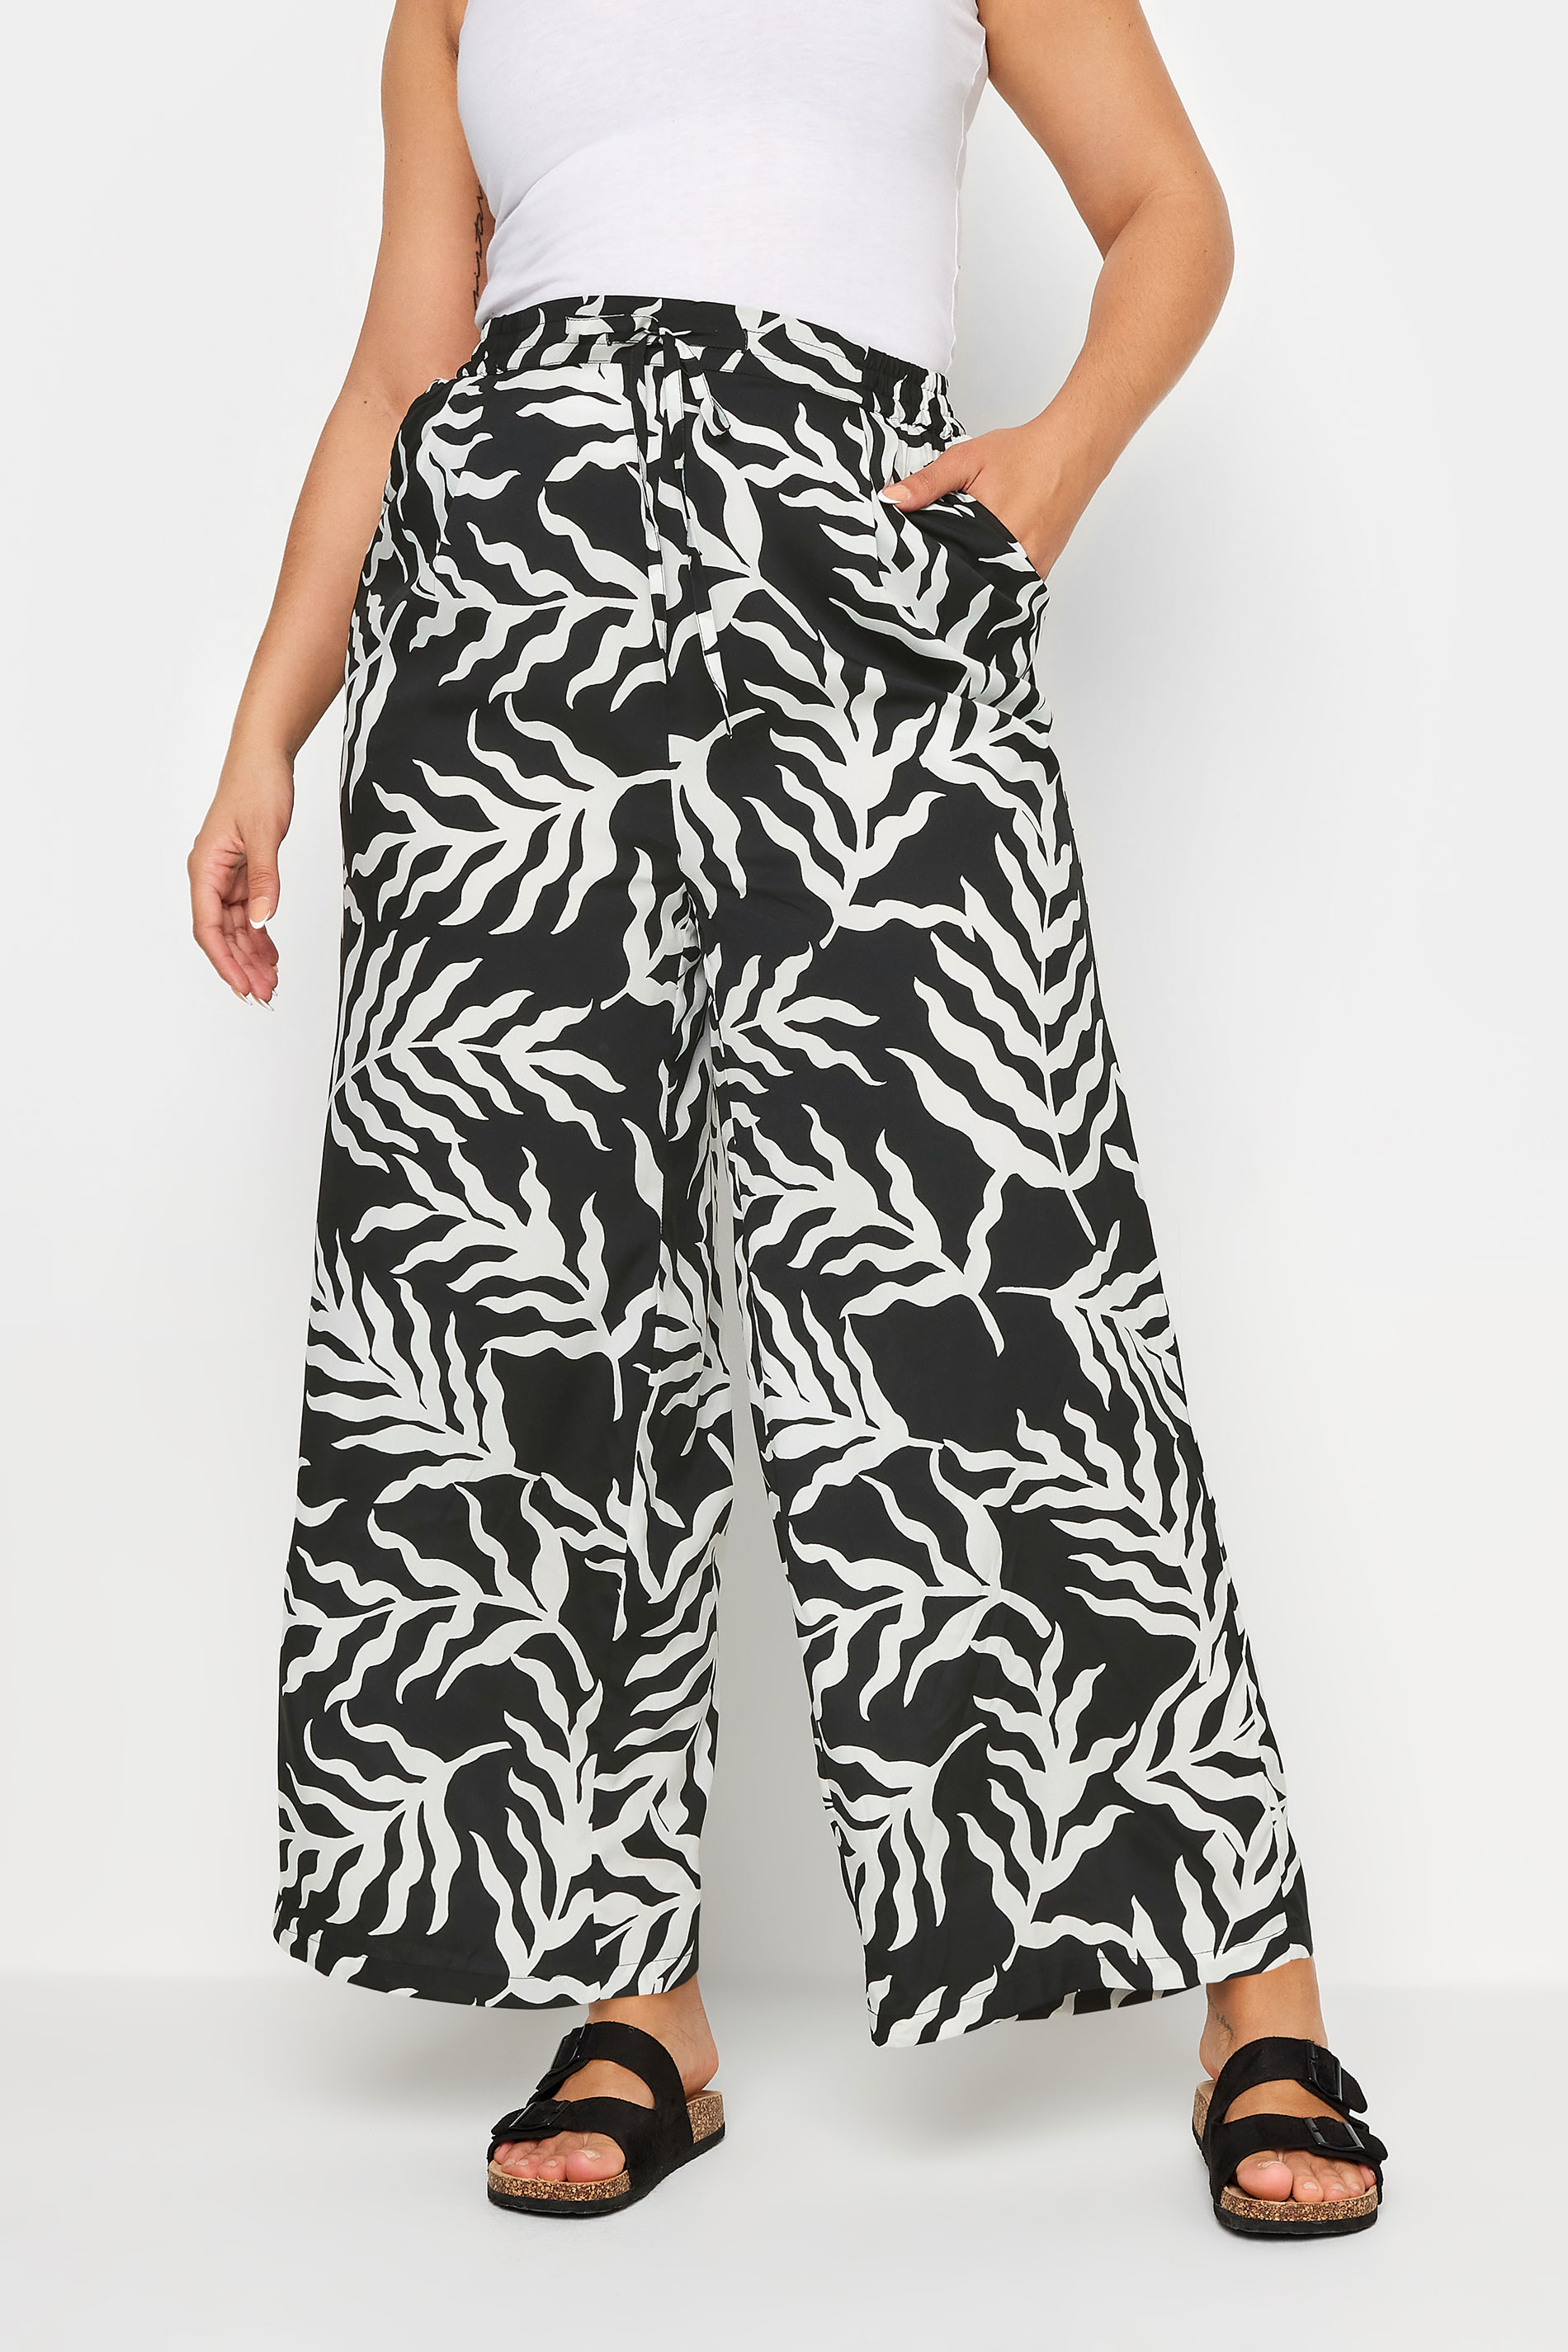 LIMITED COLLECTION Plus Size Black Leaf Print Drawstring Wide Leg Trousers | Yours Clothing 2